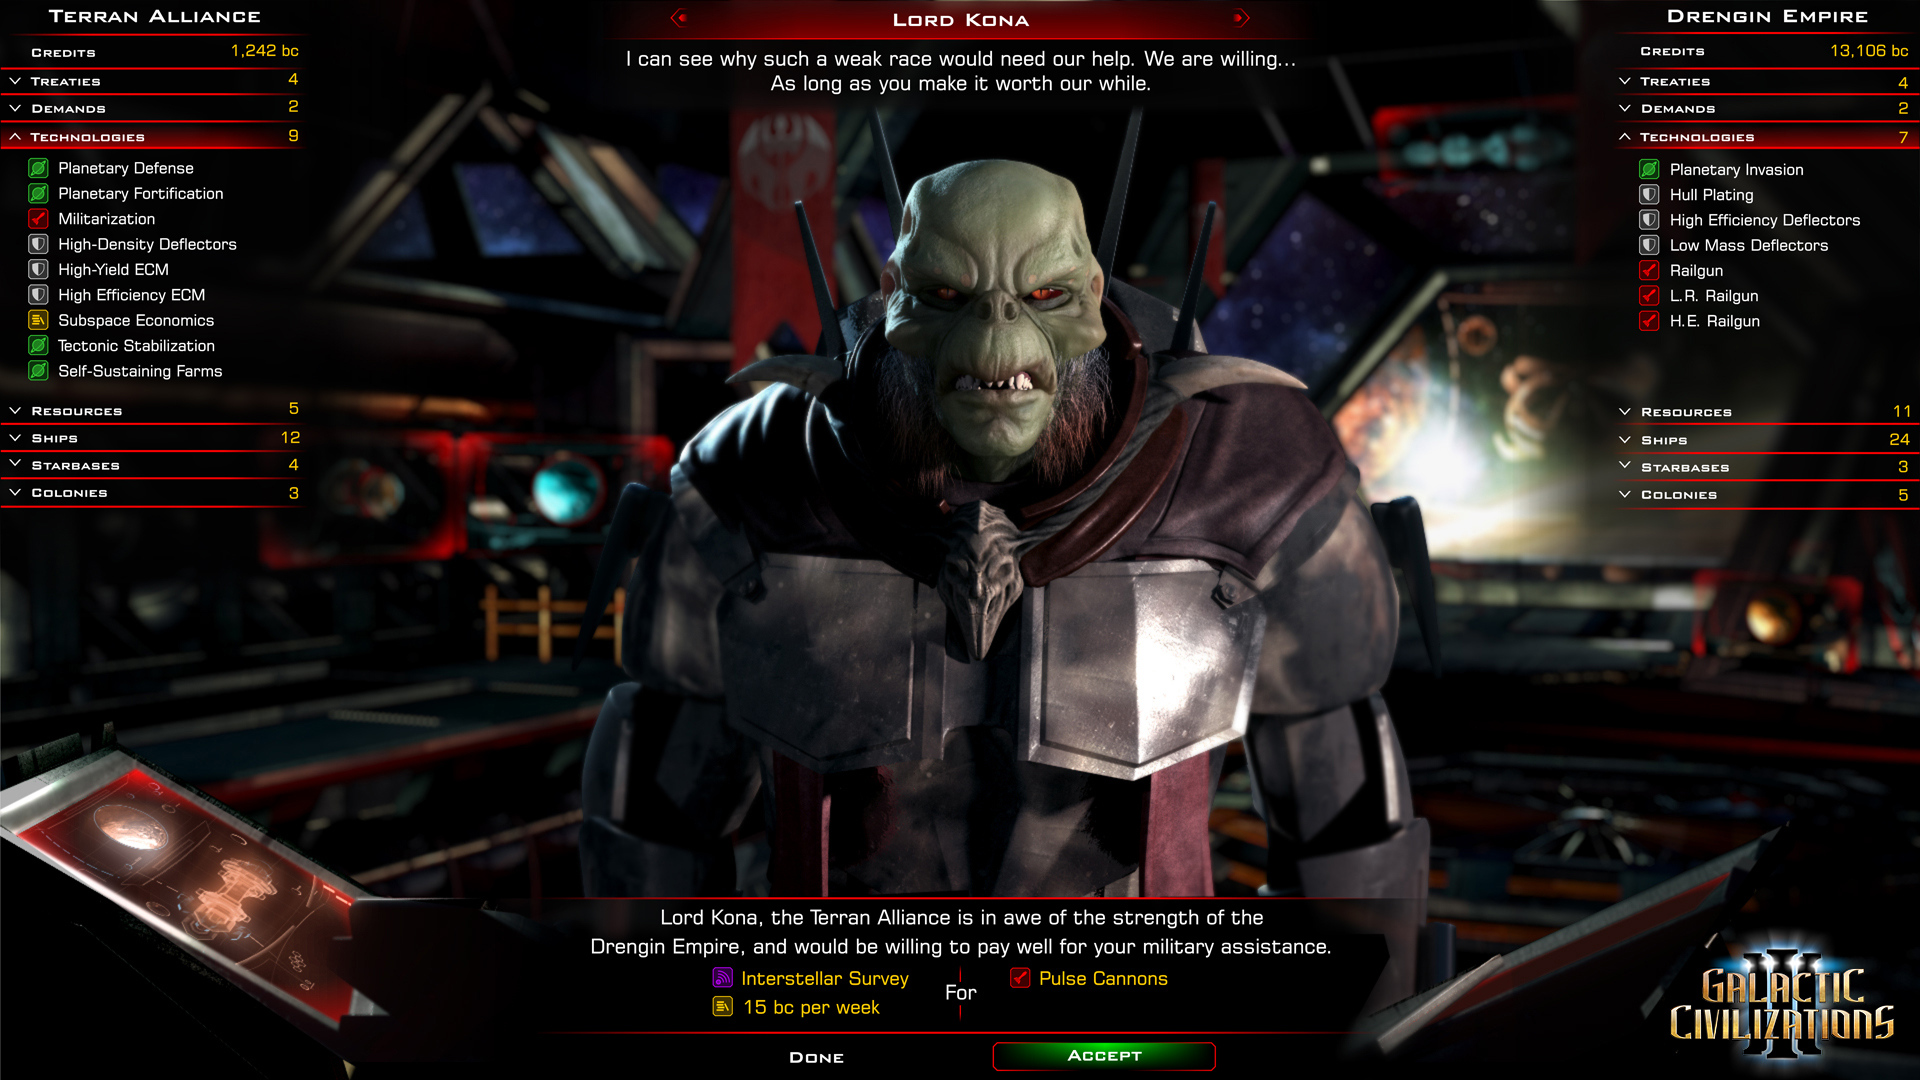 First Look at Galactic Civilizations III